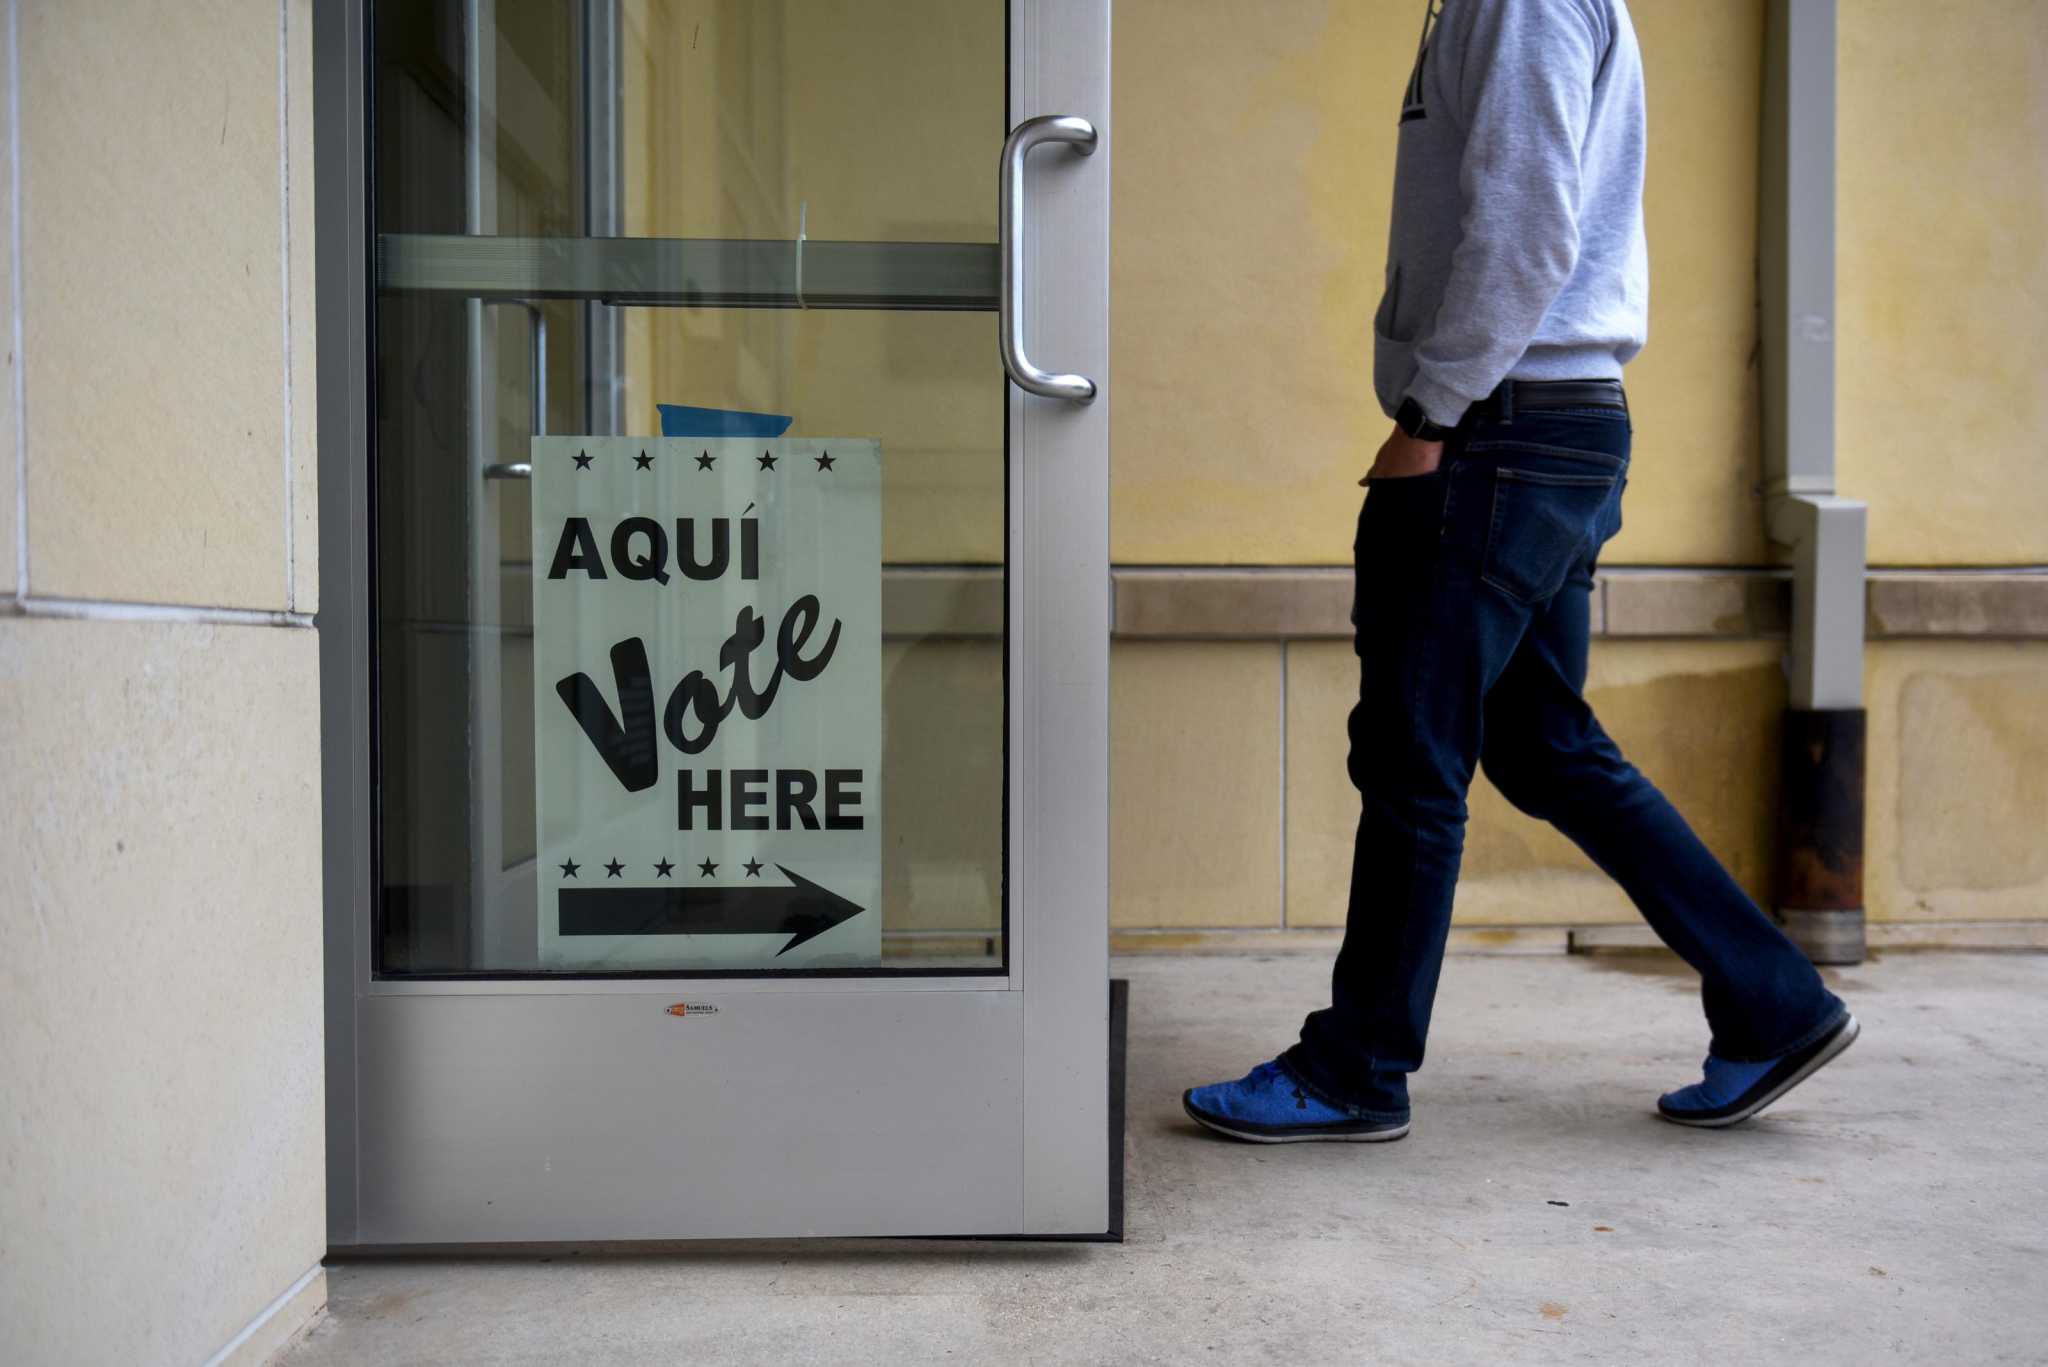 Early voting begins Monday in special election for San Antonio’s open